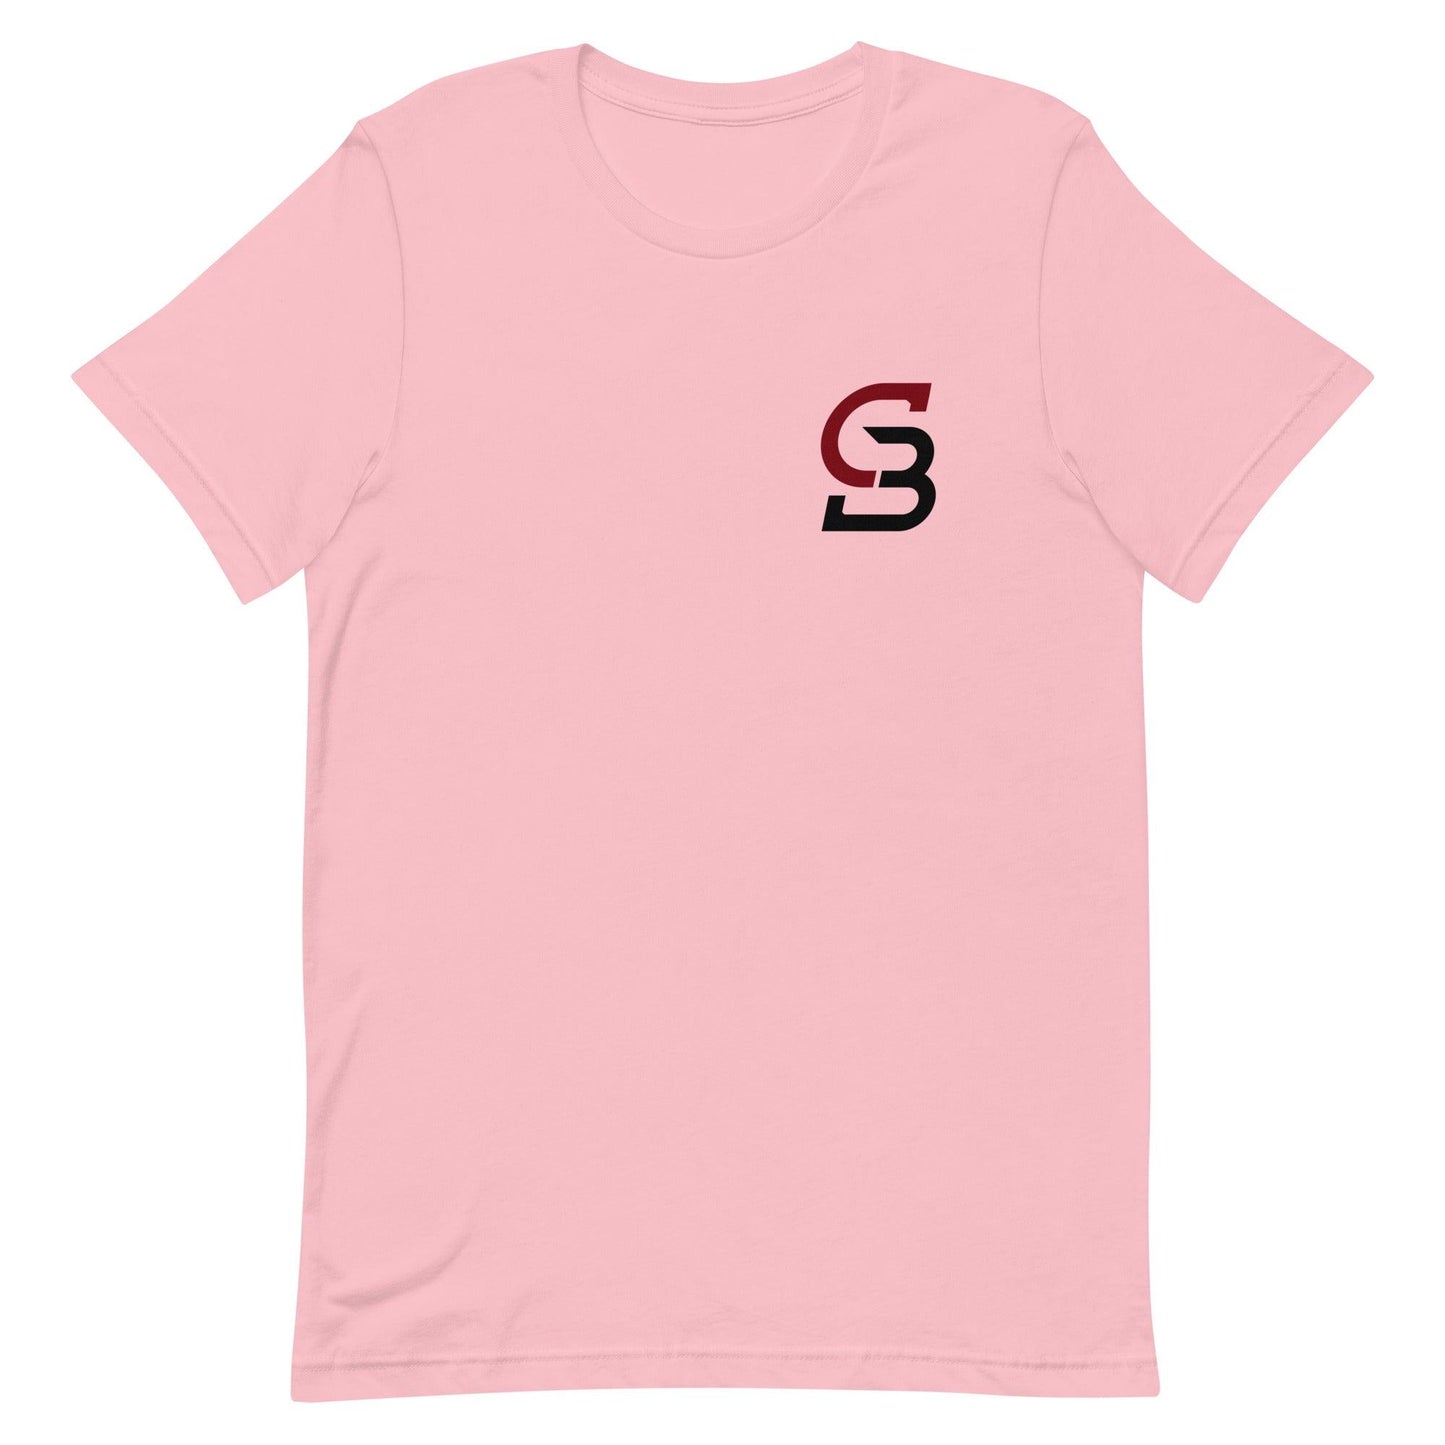 Catherine Barry "Signature" t-shirt - Fan Arch